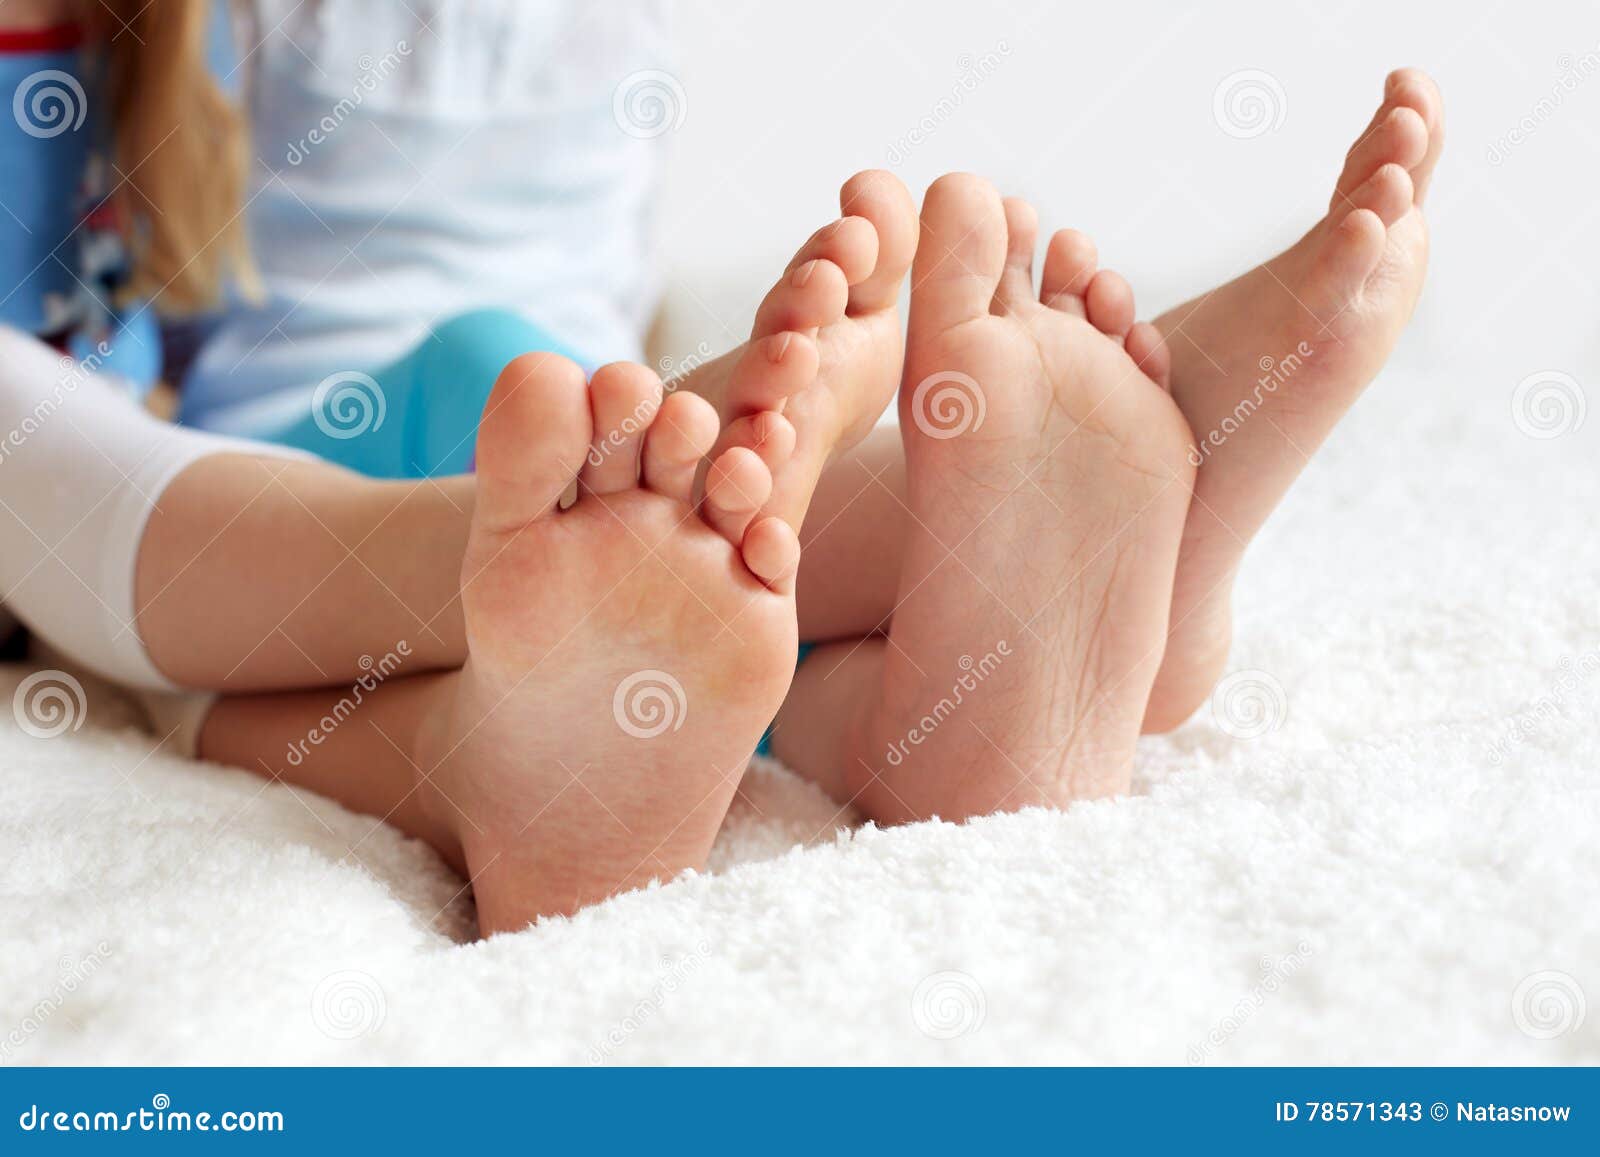 funny children's foots is barefoot, closeup.